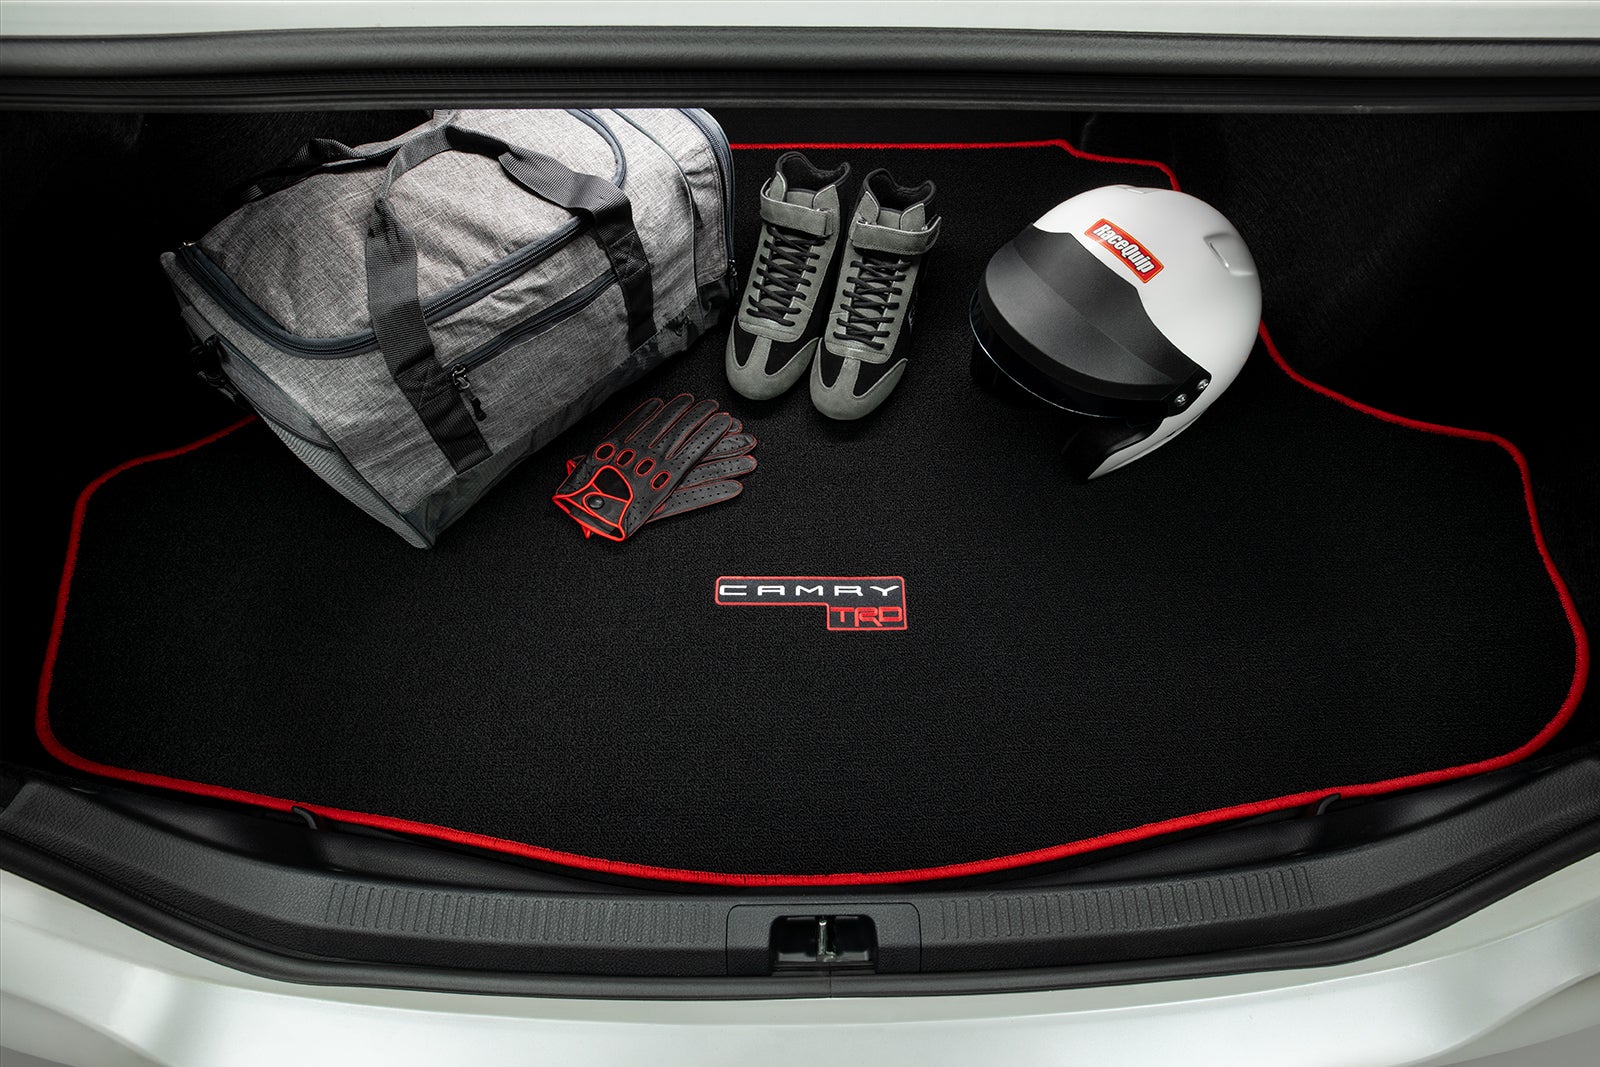 What you can get to personalize your vehicle at Fiore Toyota in Hollidaysburg | the trunk of the 2020 camry